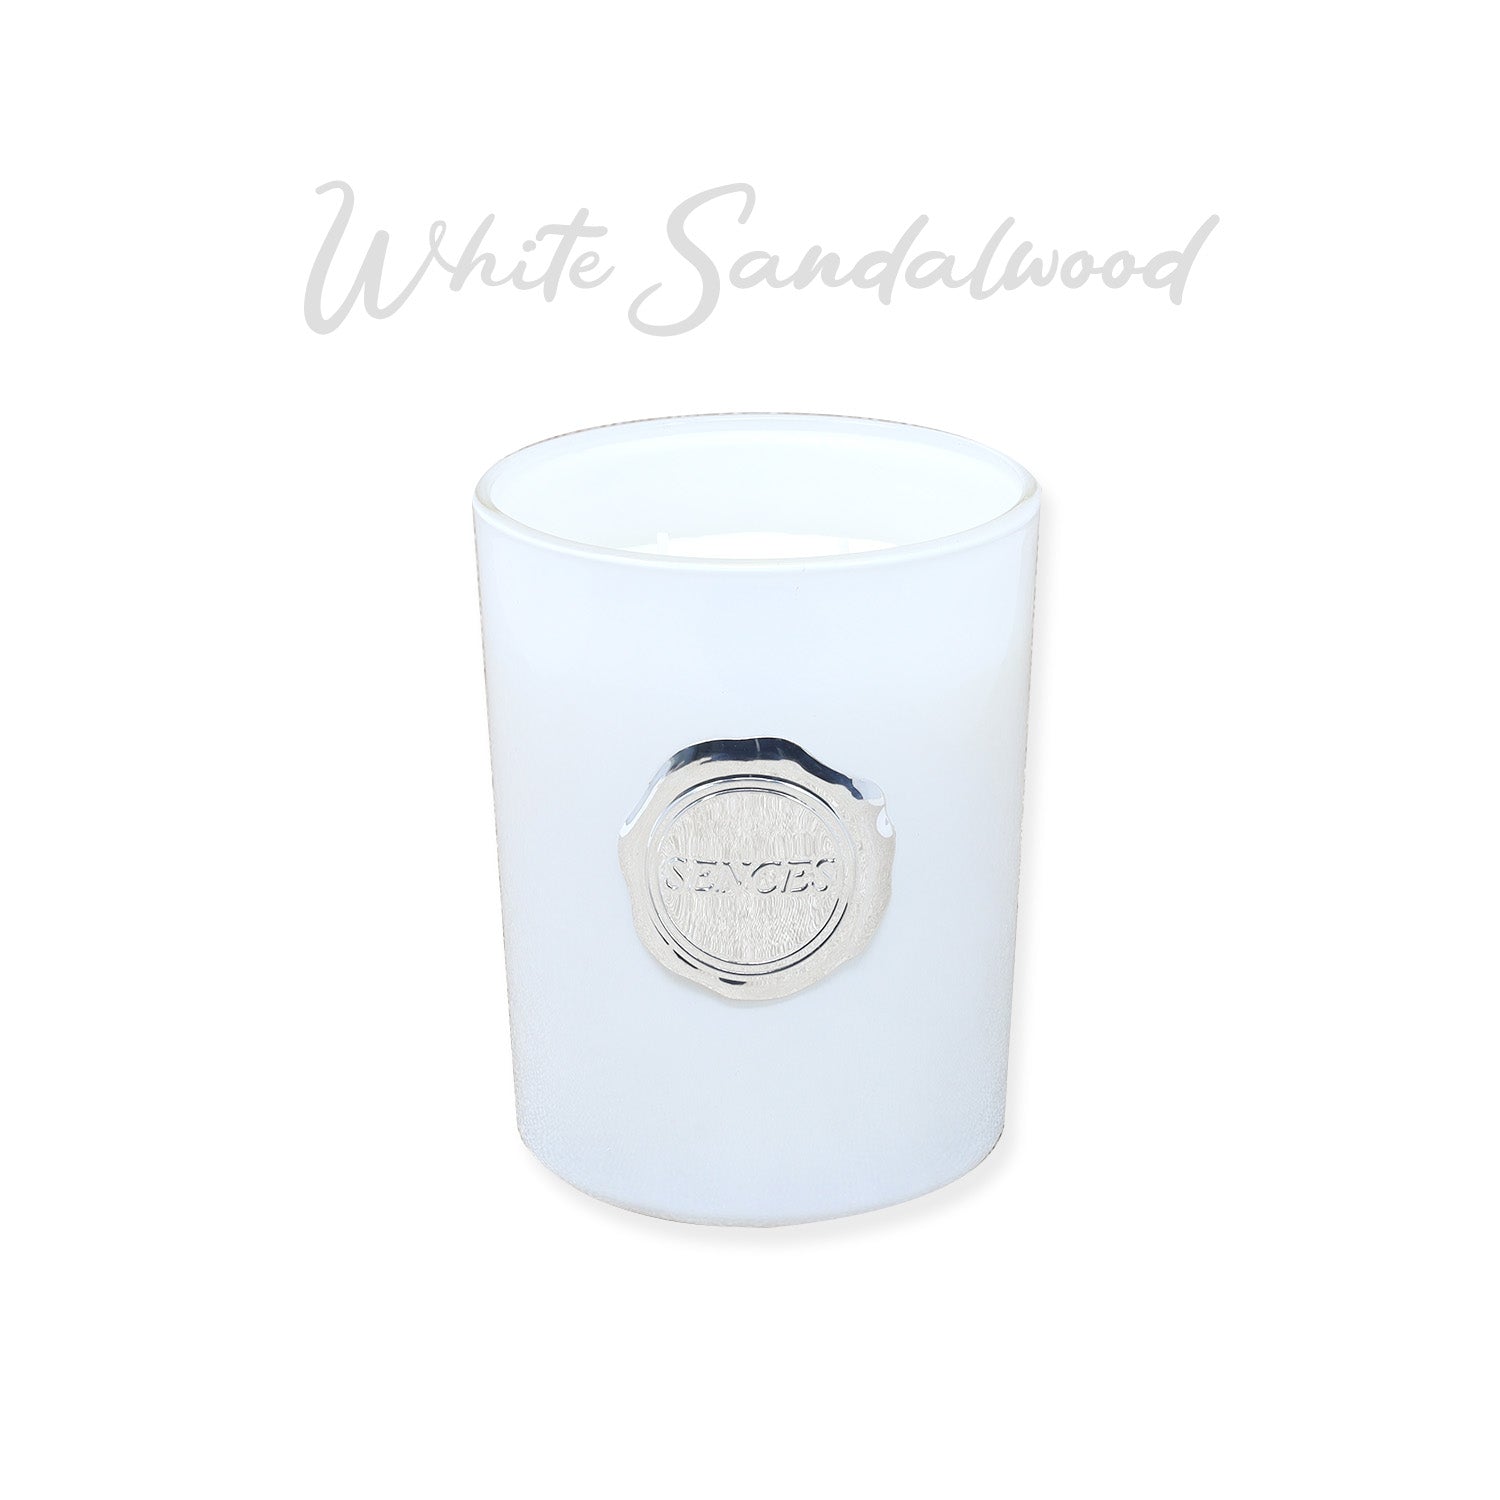 2-Wicks 470g White Sandalwood Scented Candle